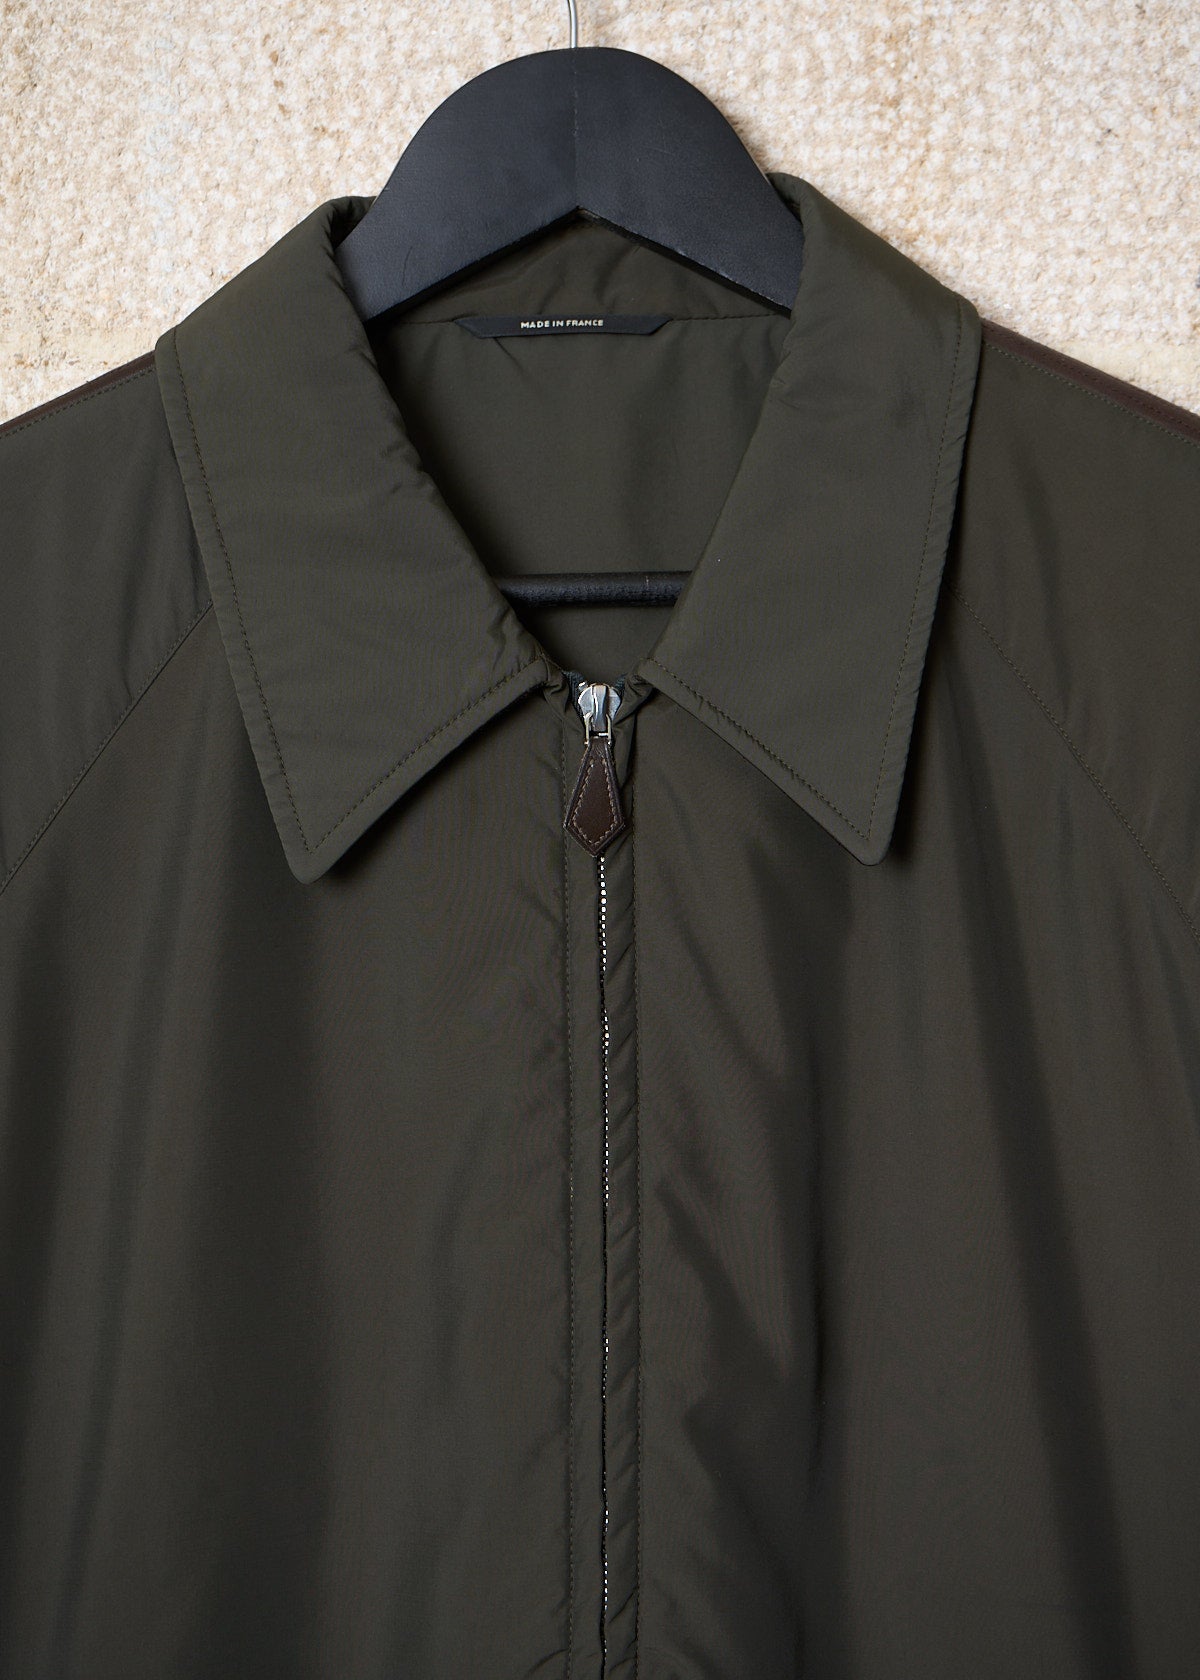 Olive Nylon Zip Blouson With Brown Leather Details 2000's - Medium